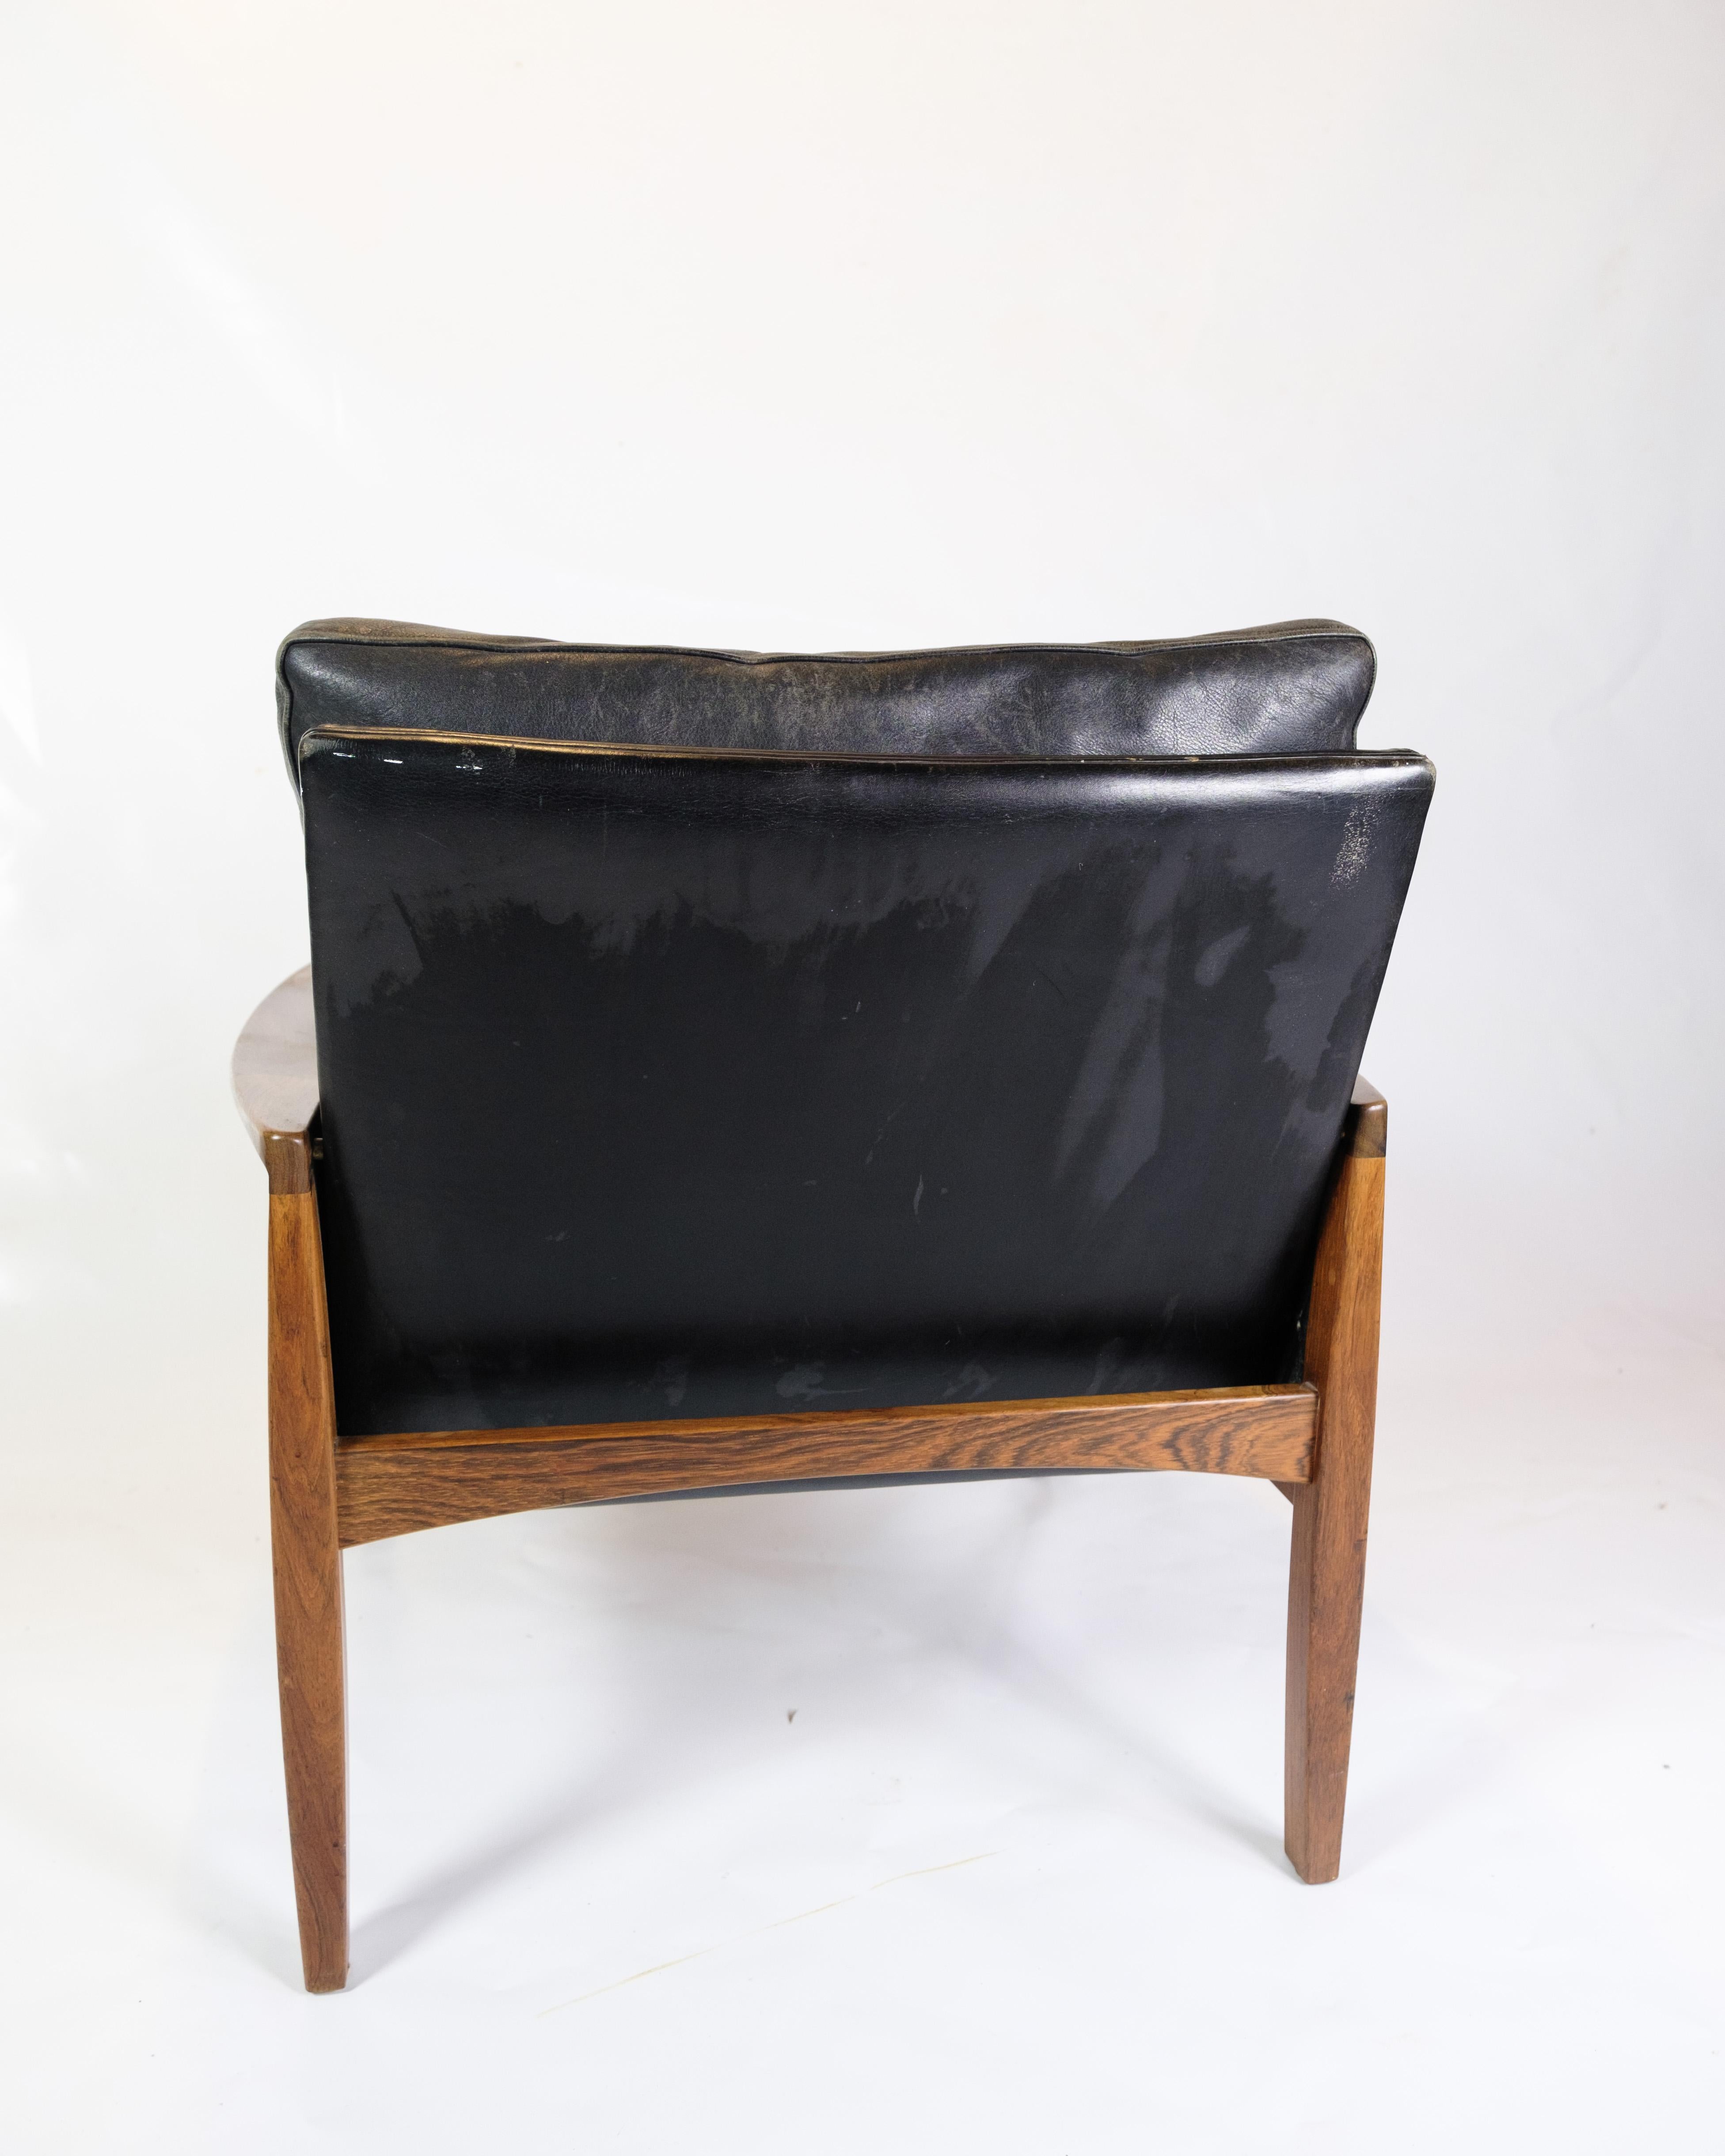 2 Armchairs Made In Rosewood By Hans Olsen Made By Brdr. Juul K. From 1960s 2